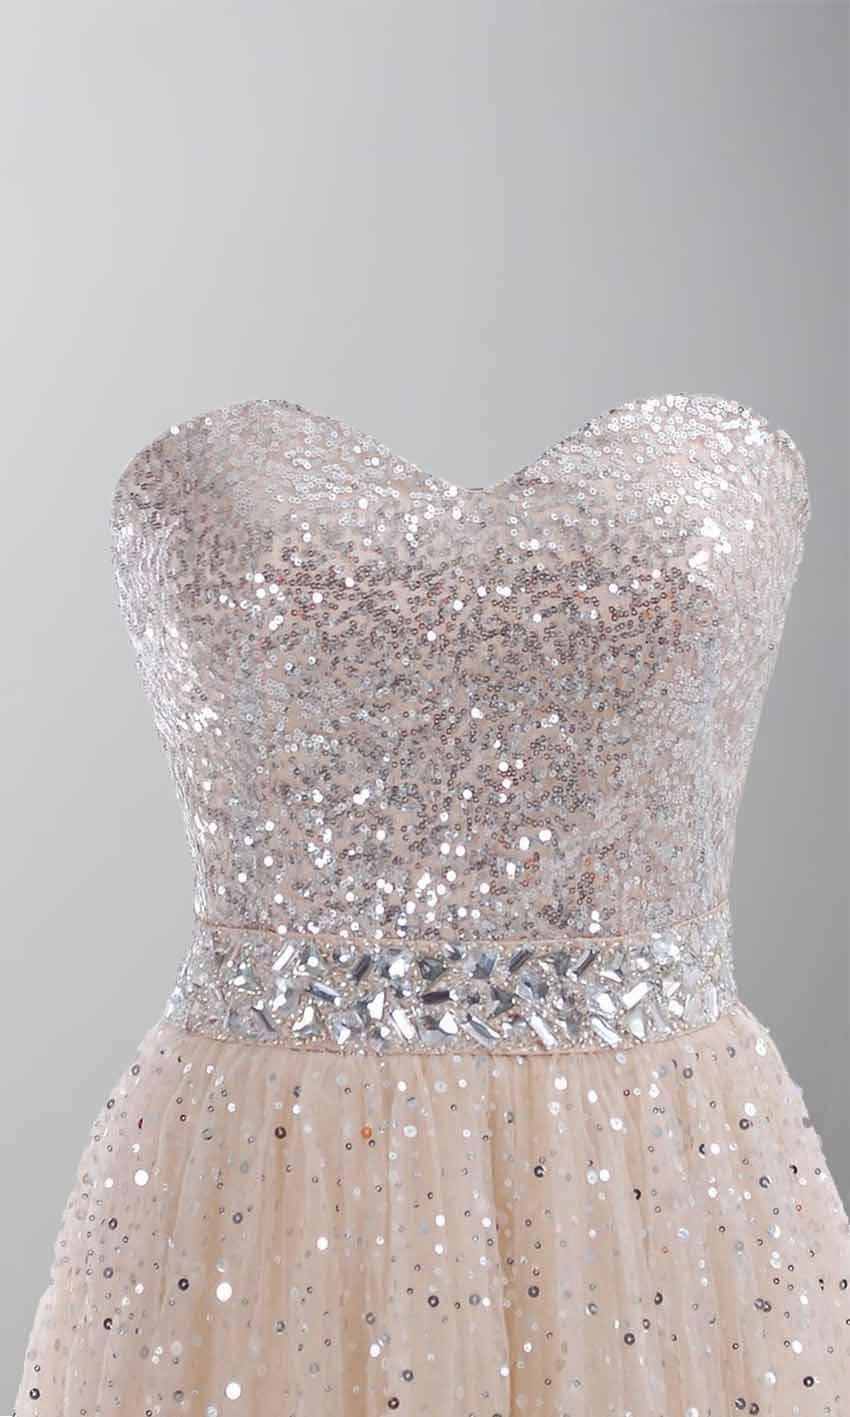 Mariage - Champagne Sequin Sweetheart Long Prom Gowns KSP254 [KSP254] - £109.00 : Cheap Prom Dresses Uk, Bridesmaid Dresses, 2014 Prom & Evening Dresses, Look for cheap elegant prom dresses 2014, cocktail gowns, or dresses for special occasions? kissprom.co.uk offe